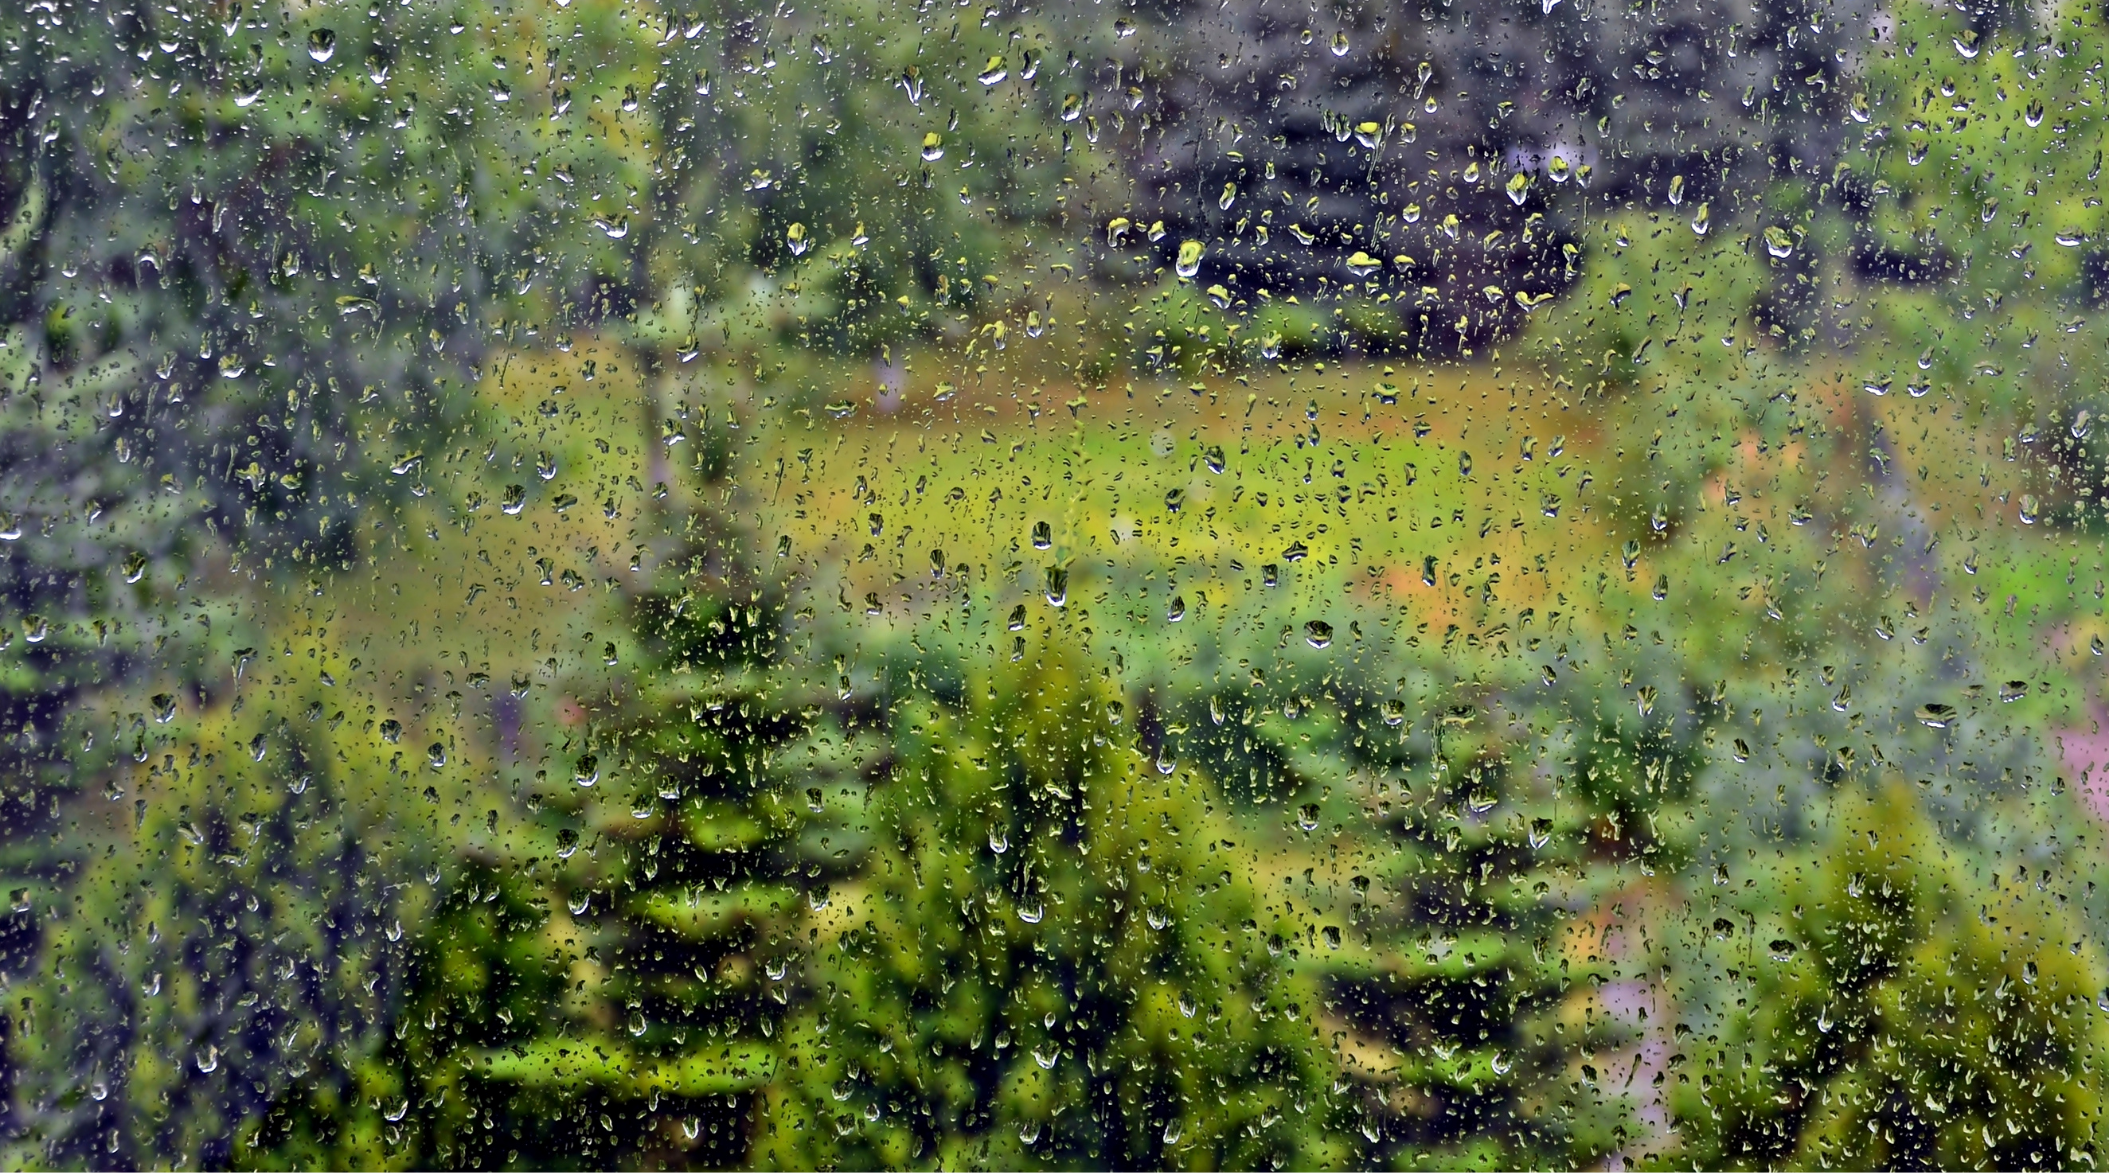 Rain on window after storm in ny state